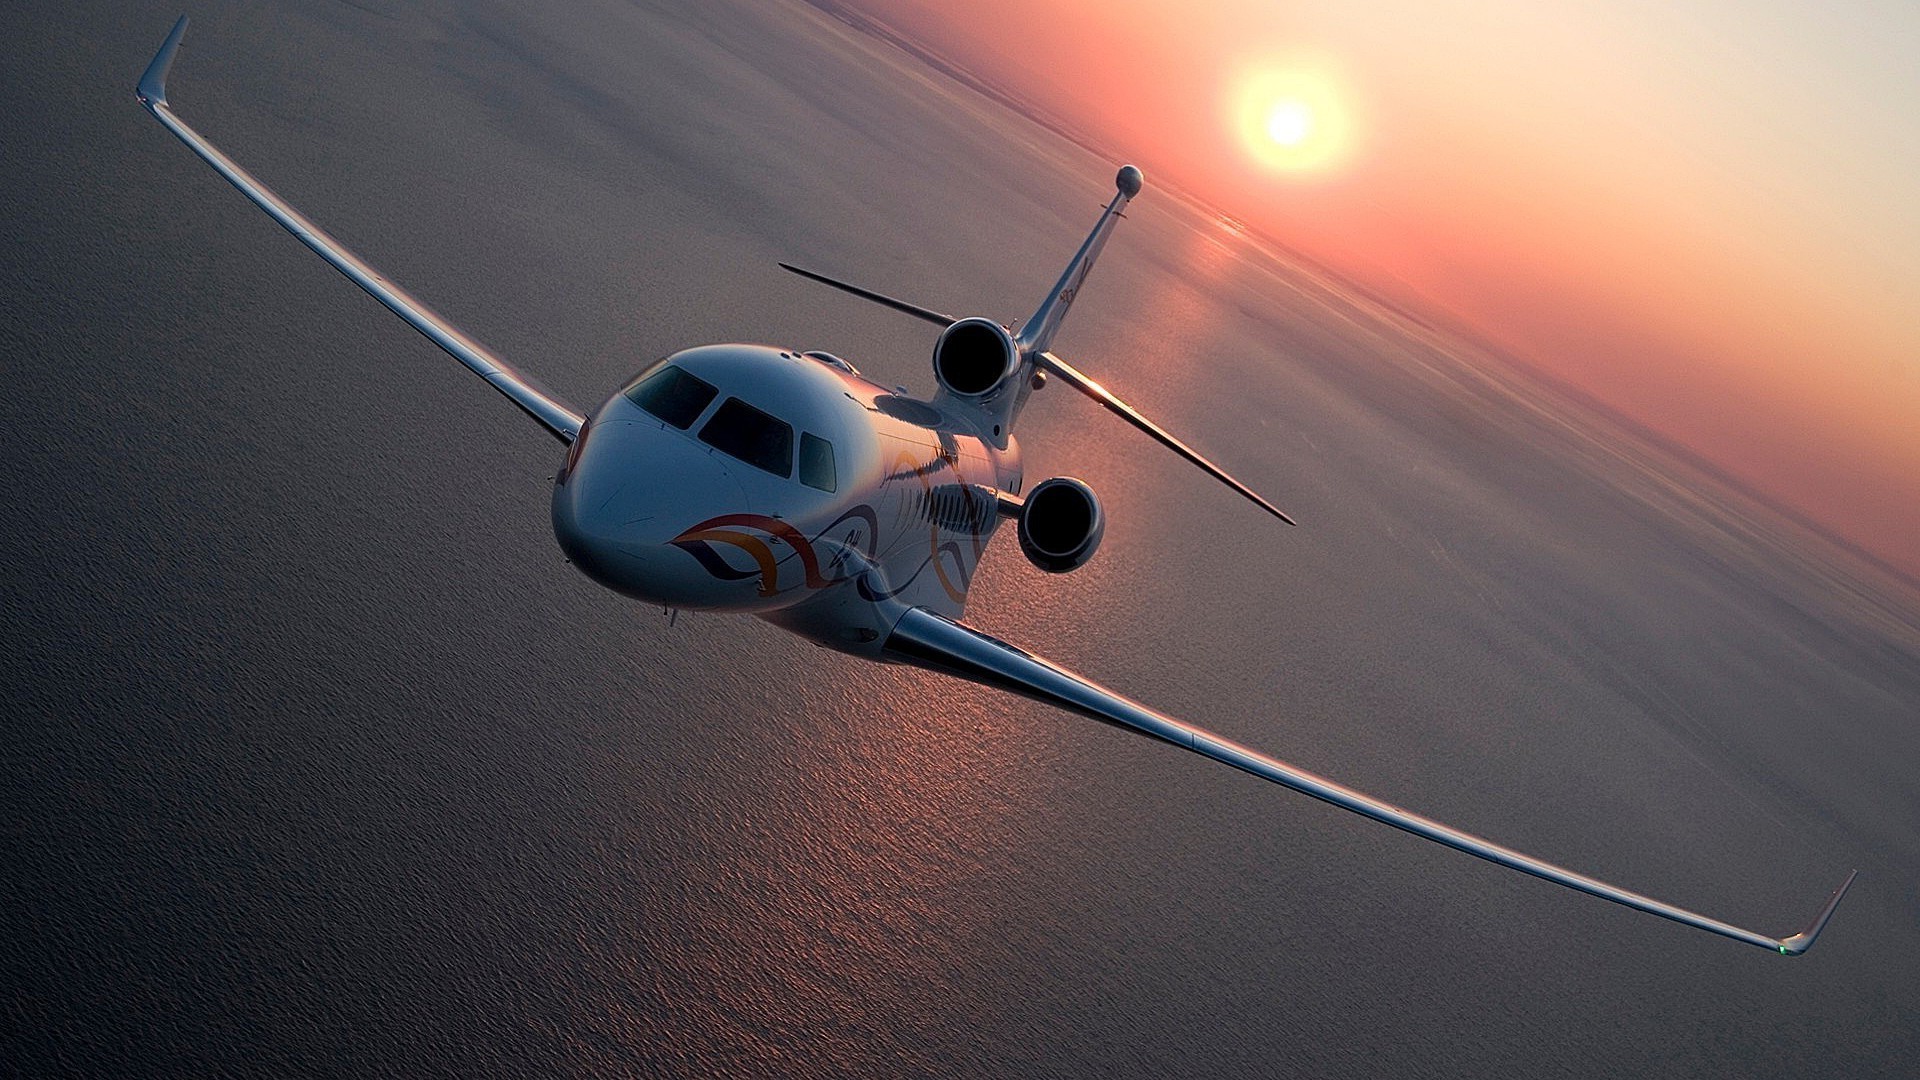 private jets airplane aircraft transportation system travel vehicle airport sky sunset flight light